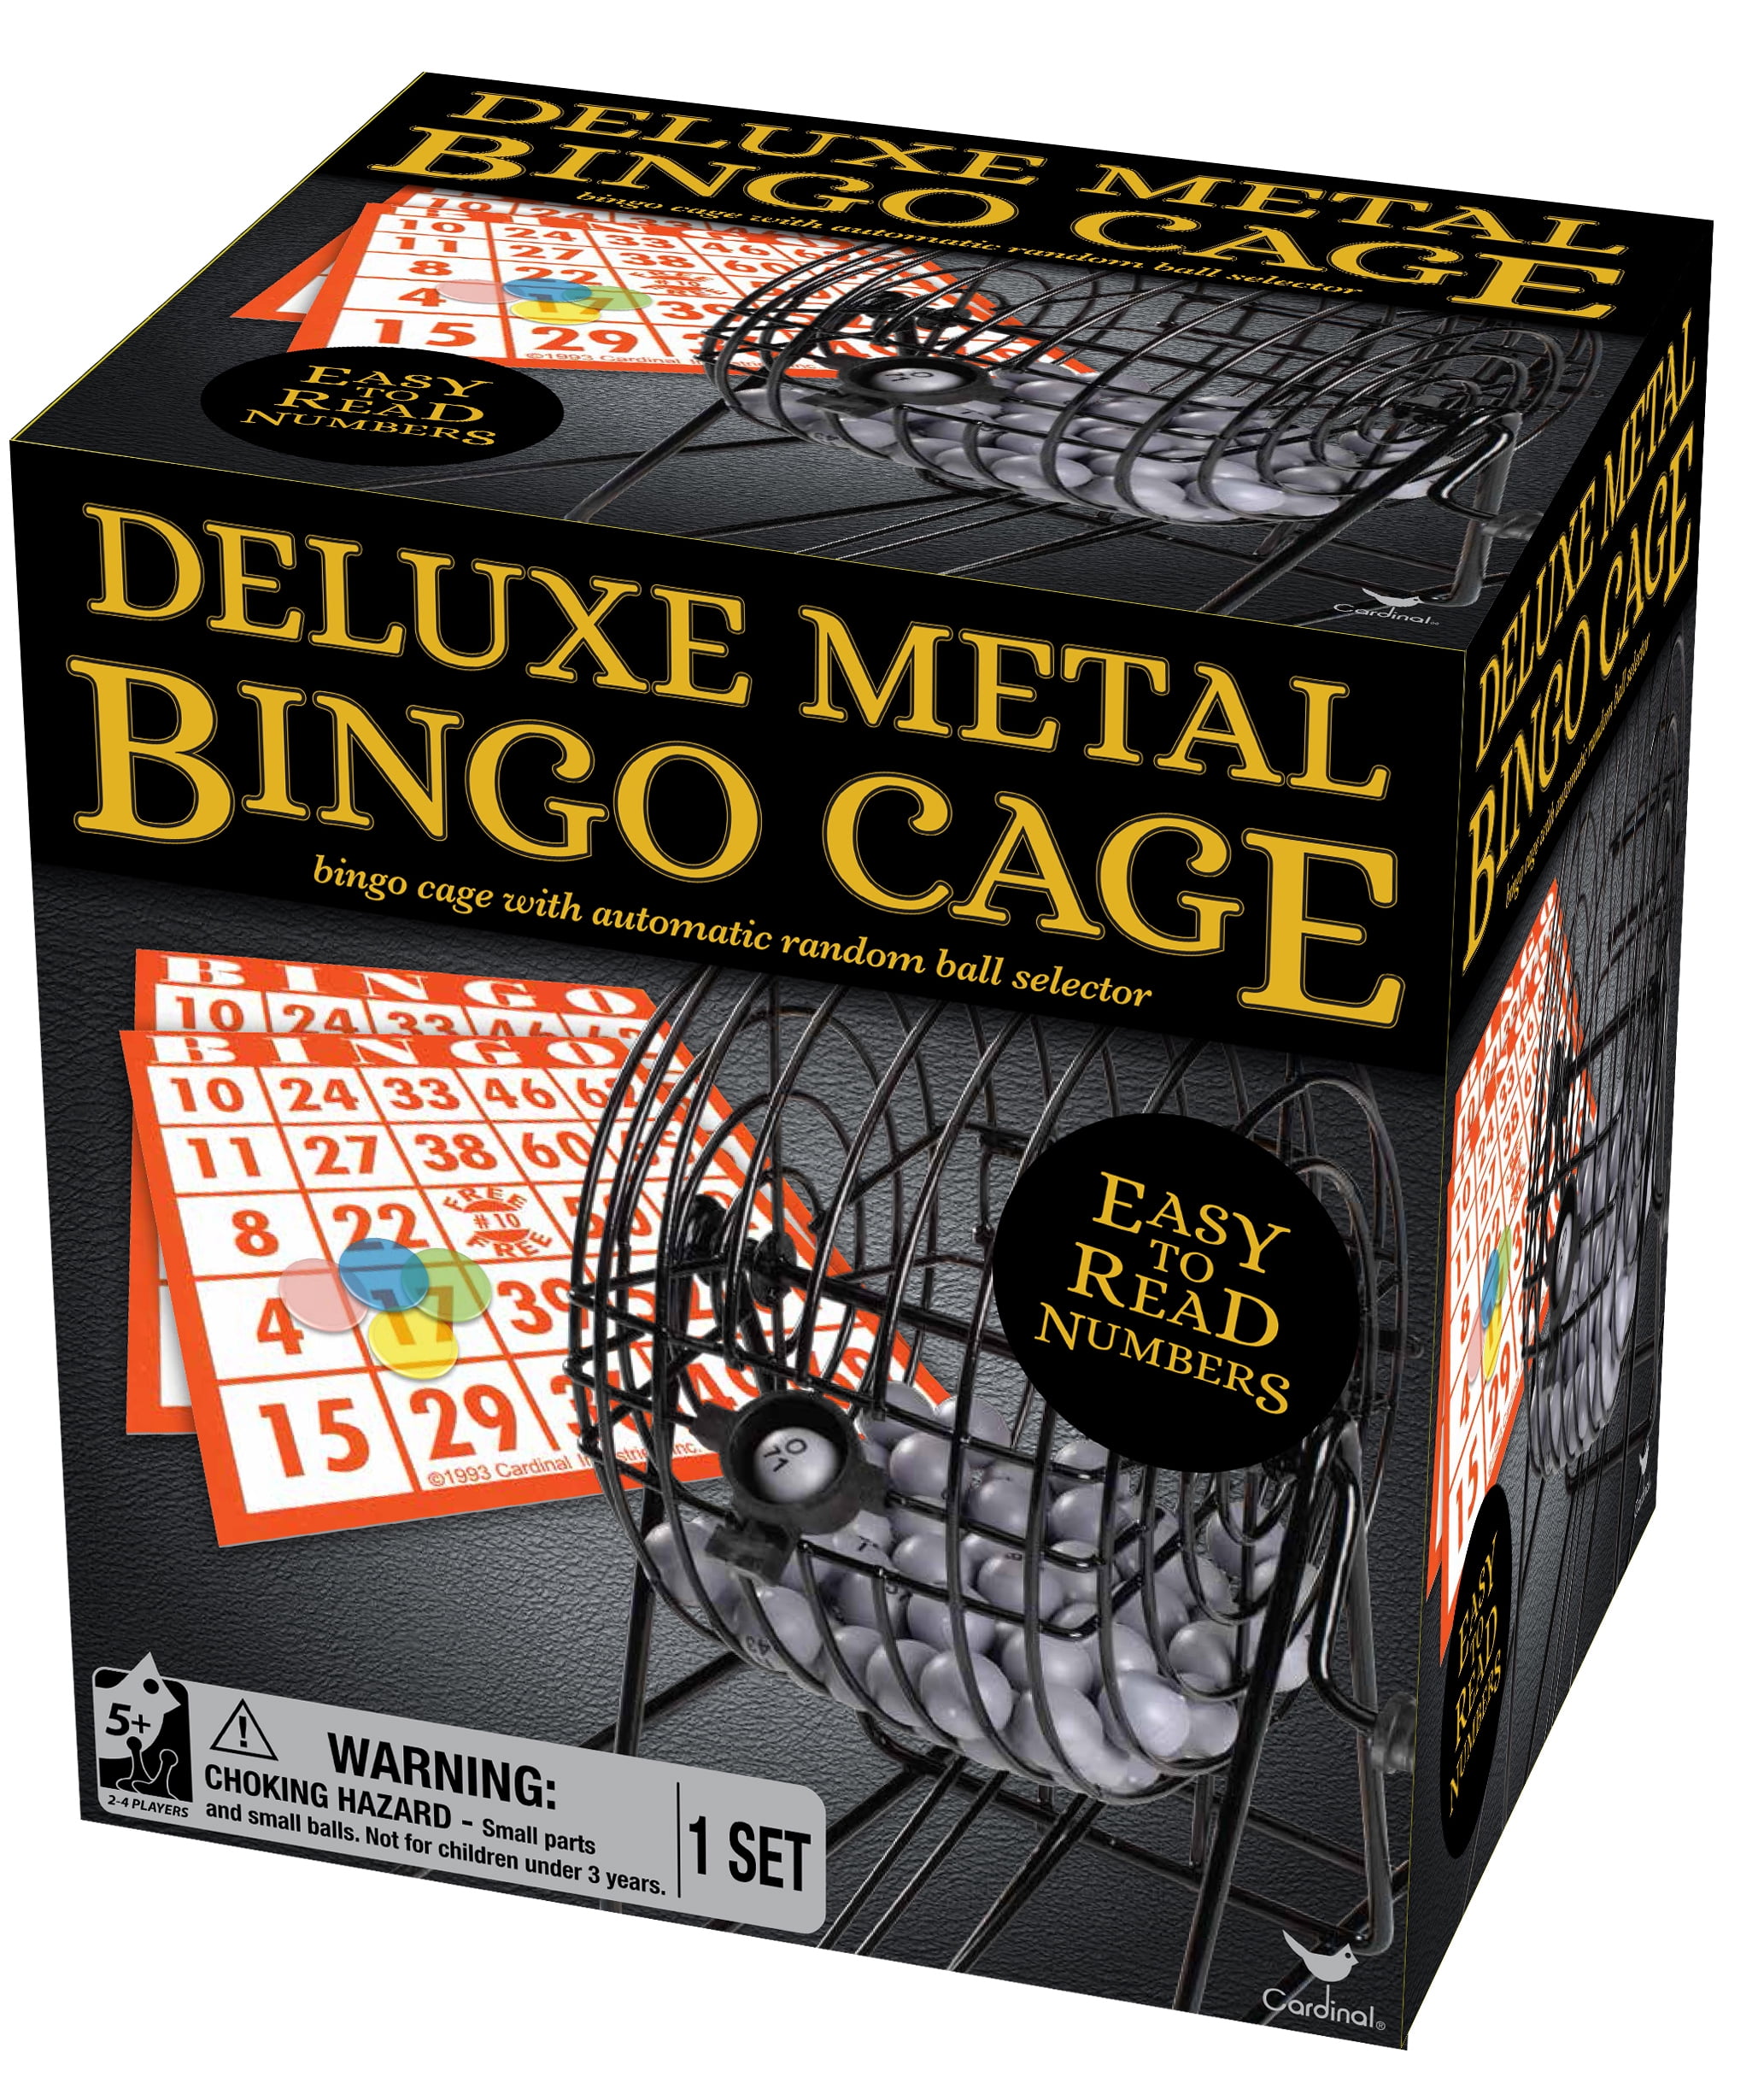 IDS Home 6 Deluxe Bingo Game Set with Metal Cage Cards Balls Chips